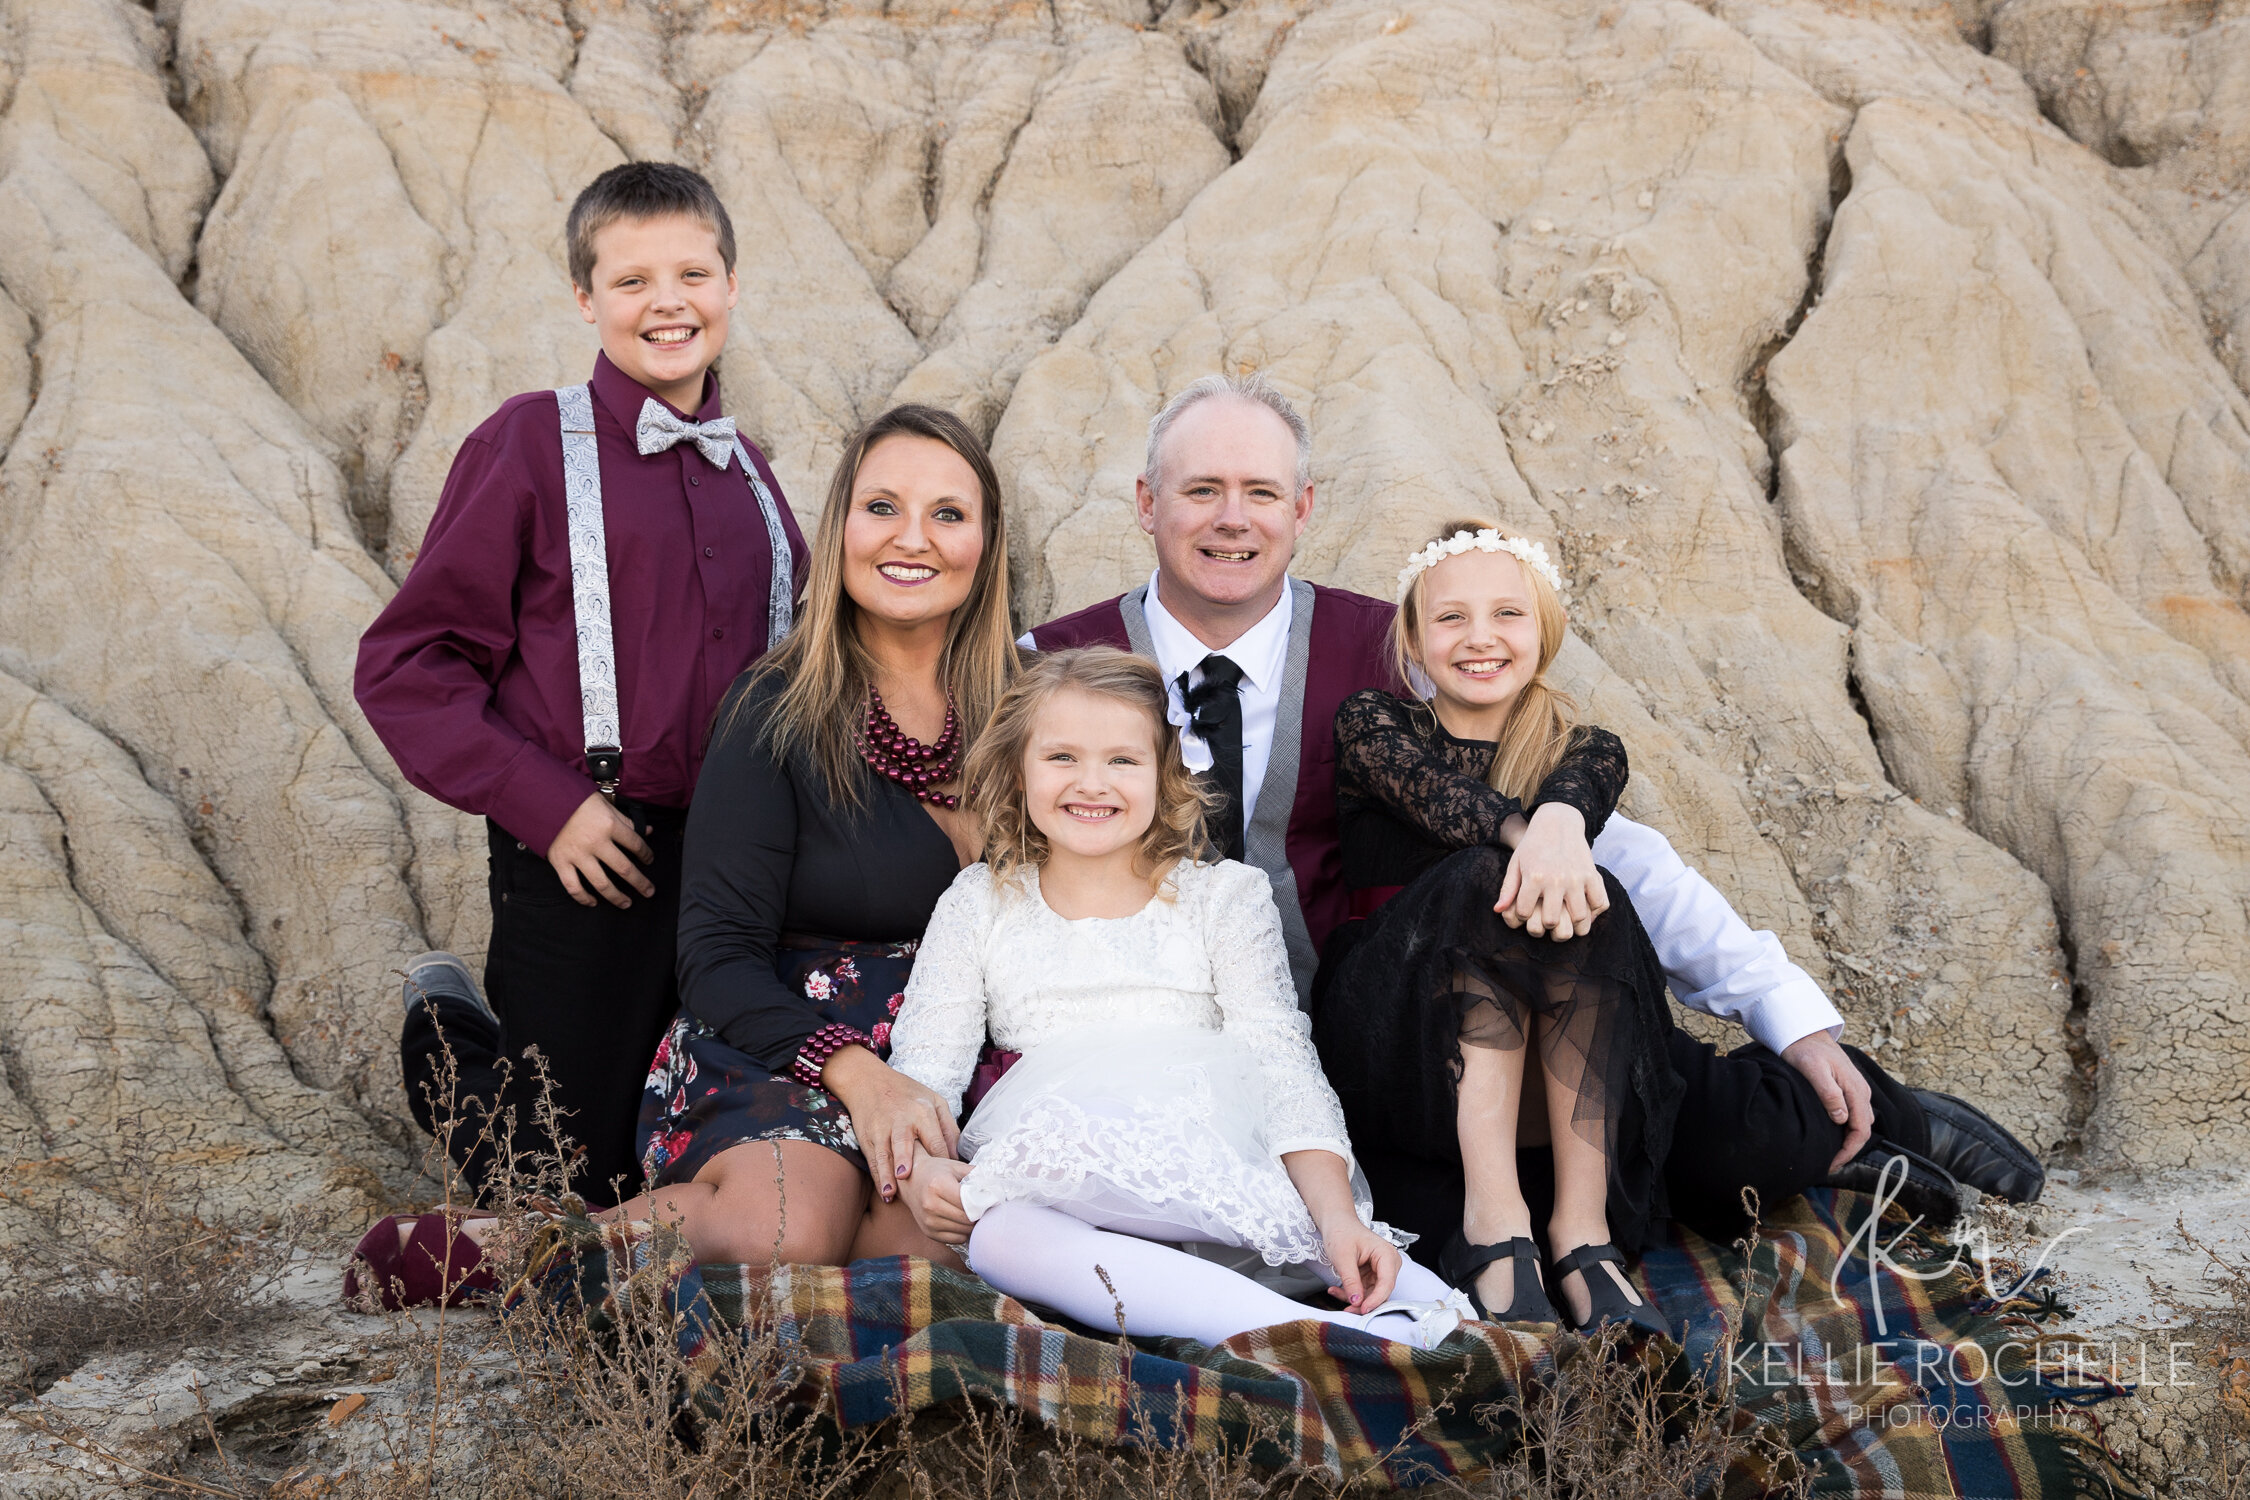 Family sitting on blanket maroon colors